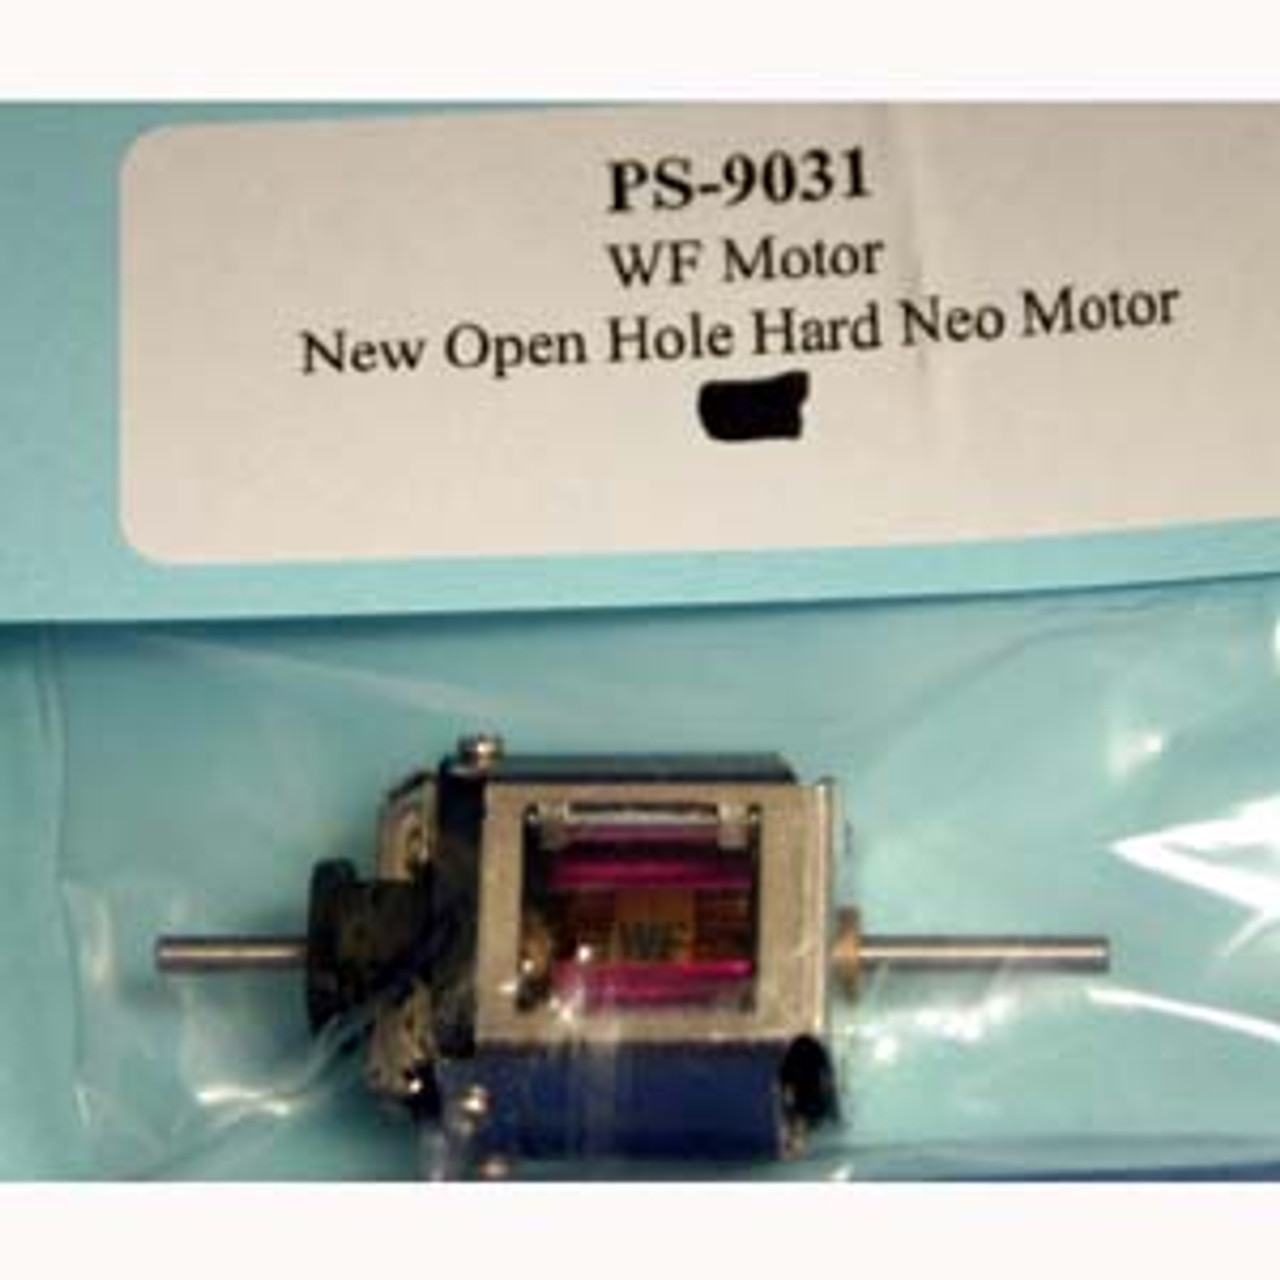 Proslot VR Neo Drag Motor  w/"Wolf" Style Arm PS9031